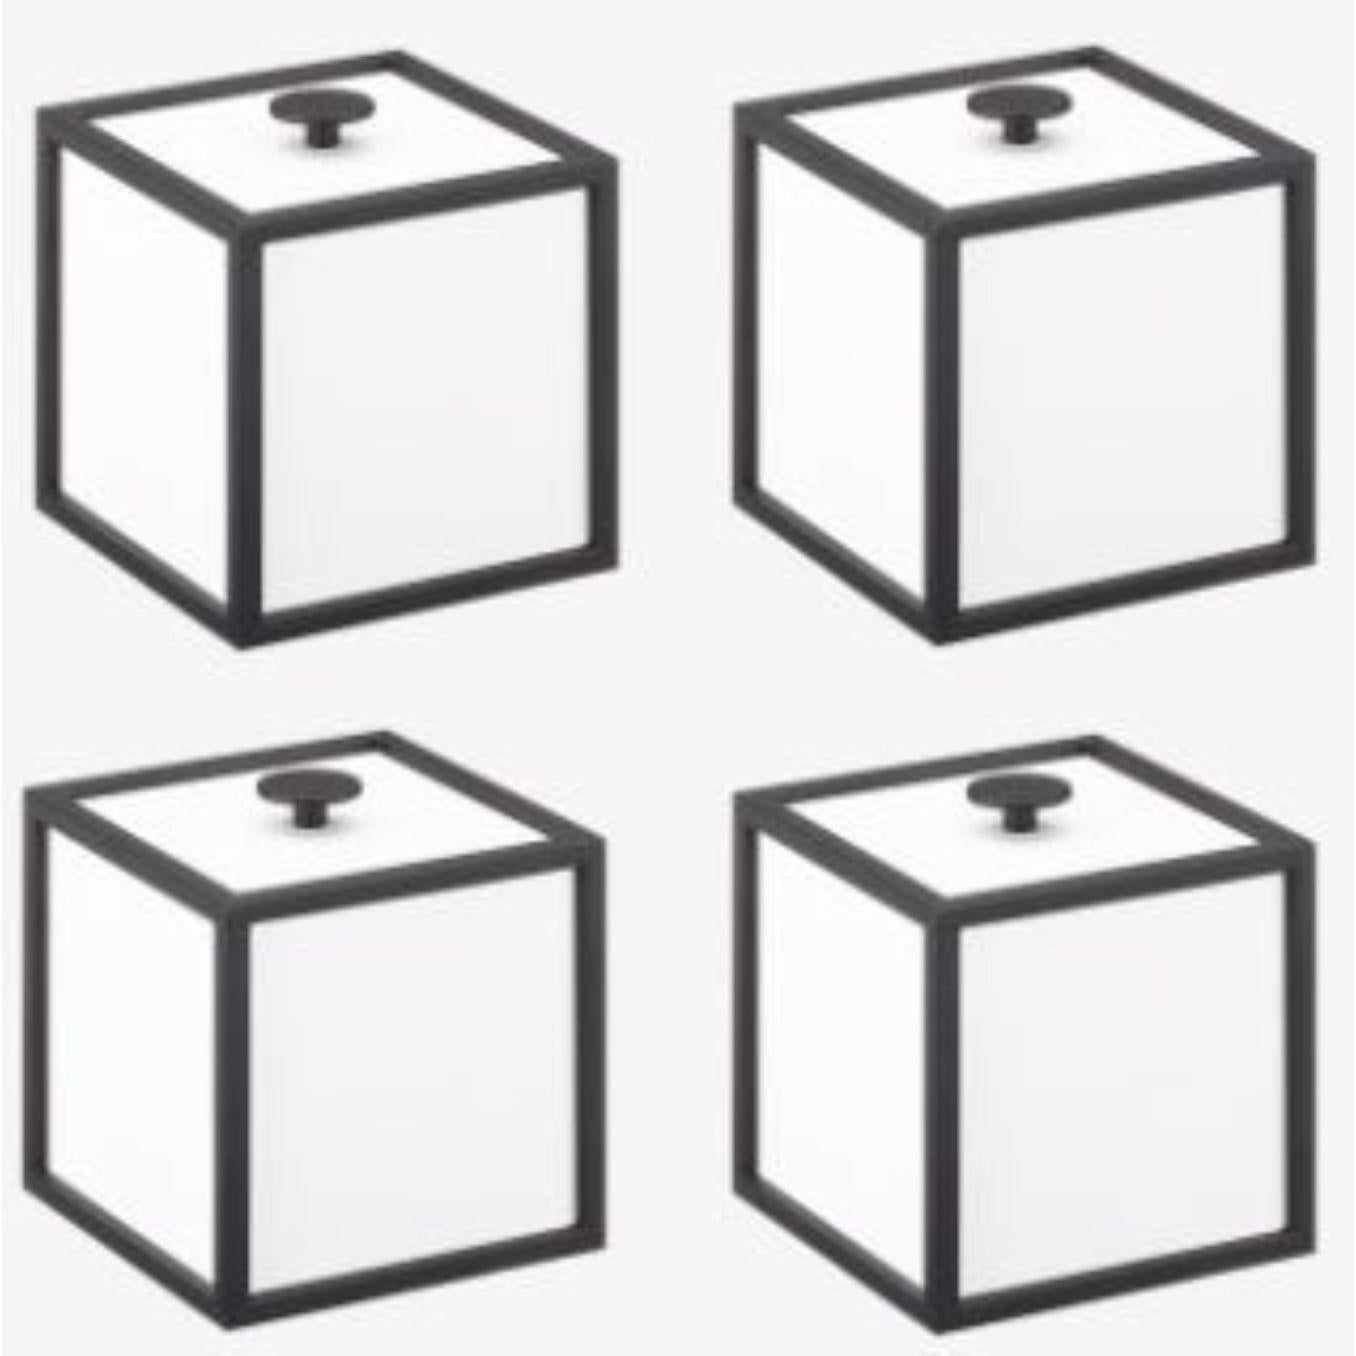 Set of 4 white frame 10 box by Lassen
Dimensions: d 10 x w 10 x h 10 cm 
Materials: Finér, Melamin, Melamine, Metal, Veneer
Weight: 0.85 Kg

Frame box is a square box in a cubistic shape. The simple boxes are inspired by the Kubus candleholder